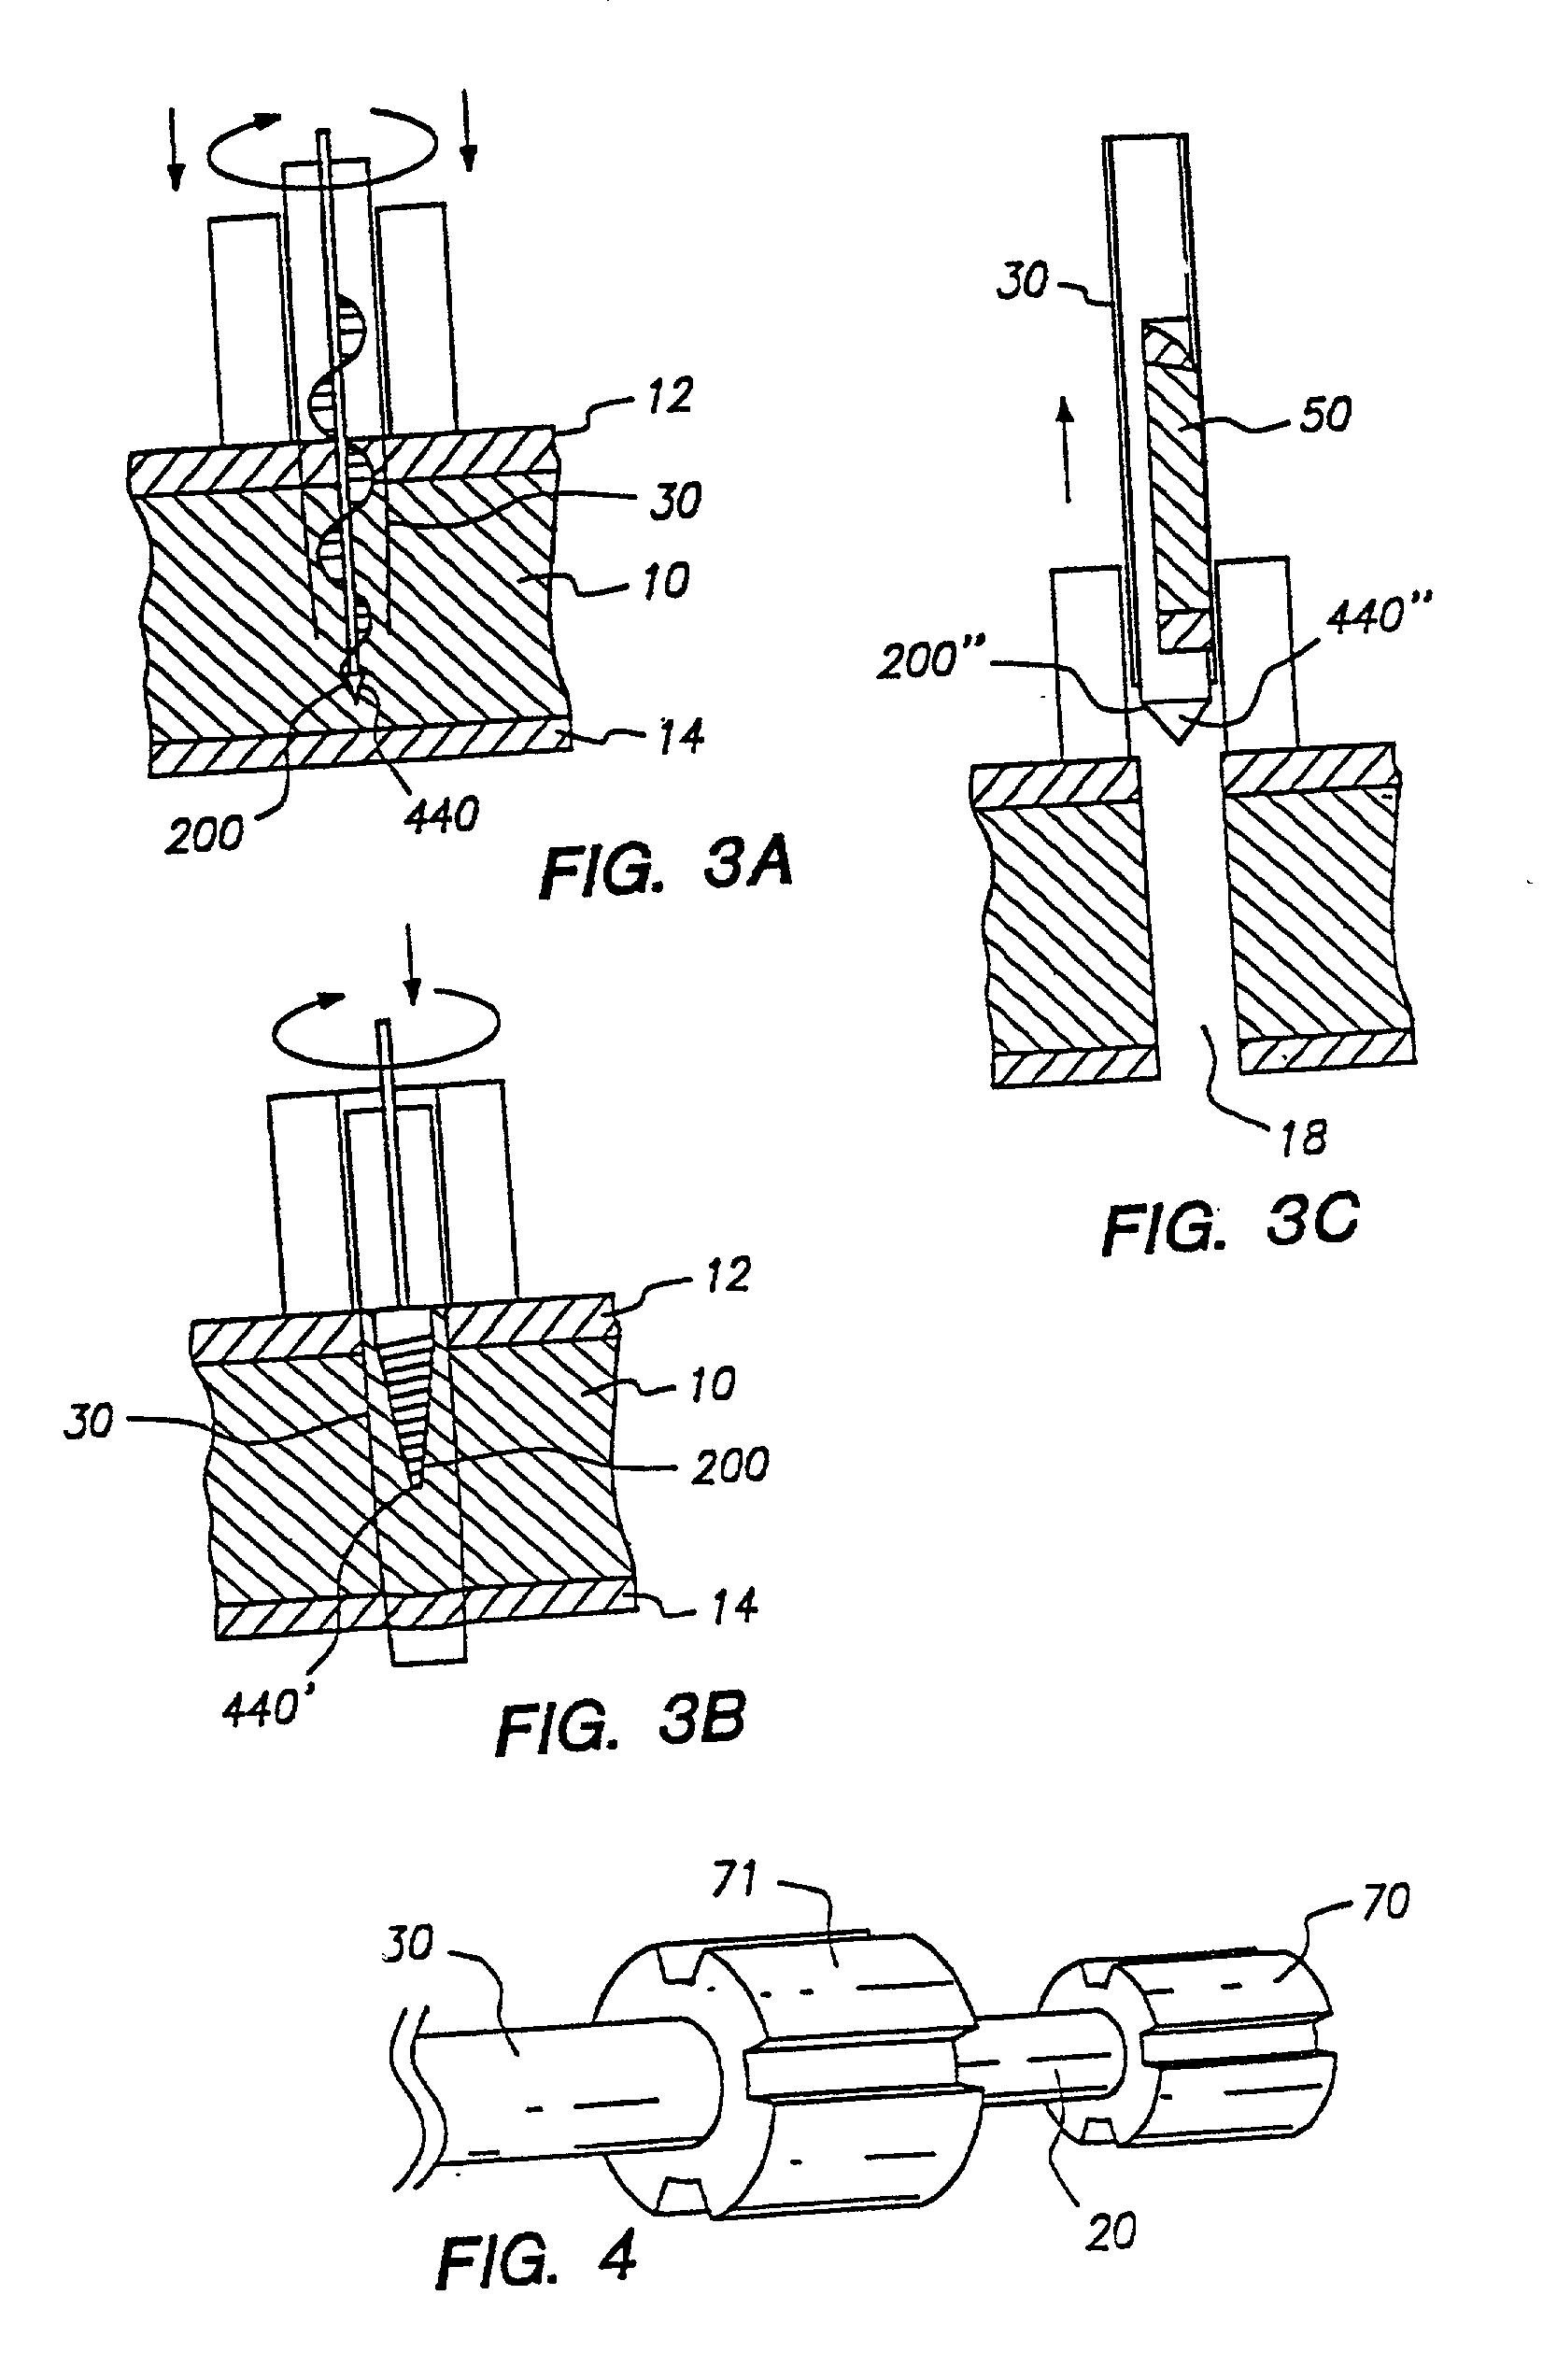 Method and apparatus for mechanical transmyocardial revascularization of the heart